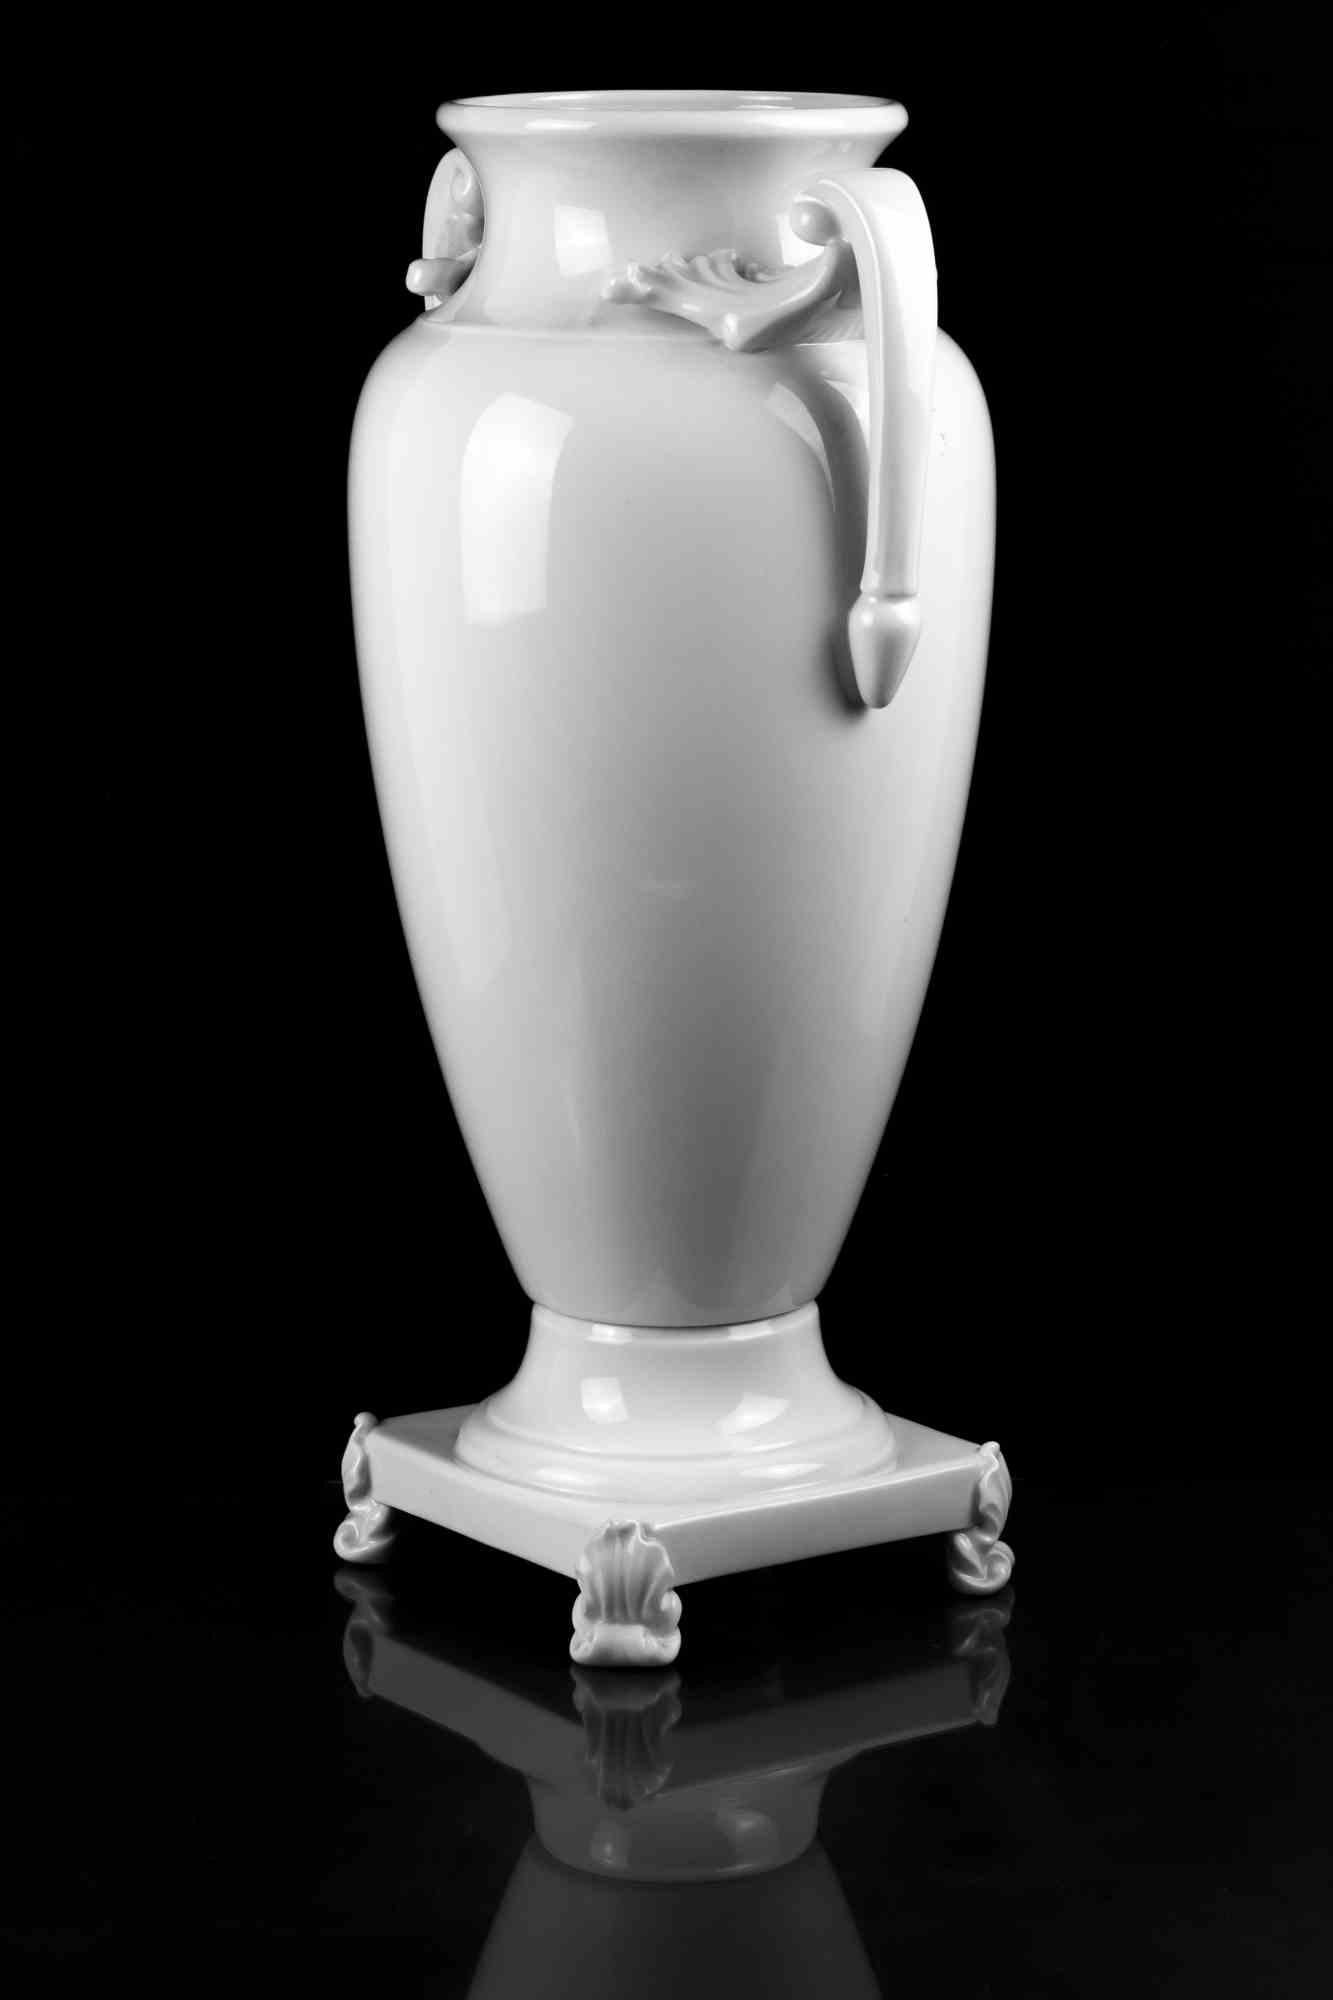 White porcelain amphora is an original decorative object realized in the 1970s.

Made in Italy.

The work has been realize in fine white porcelain. The handles are decorated. 

On the base there is the label 